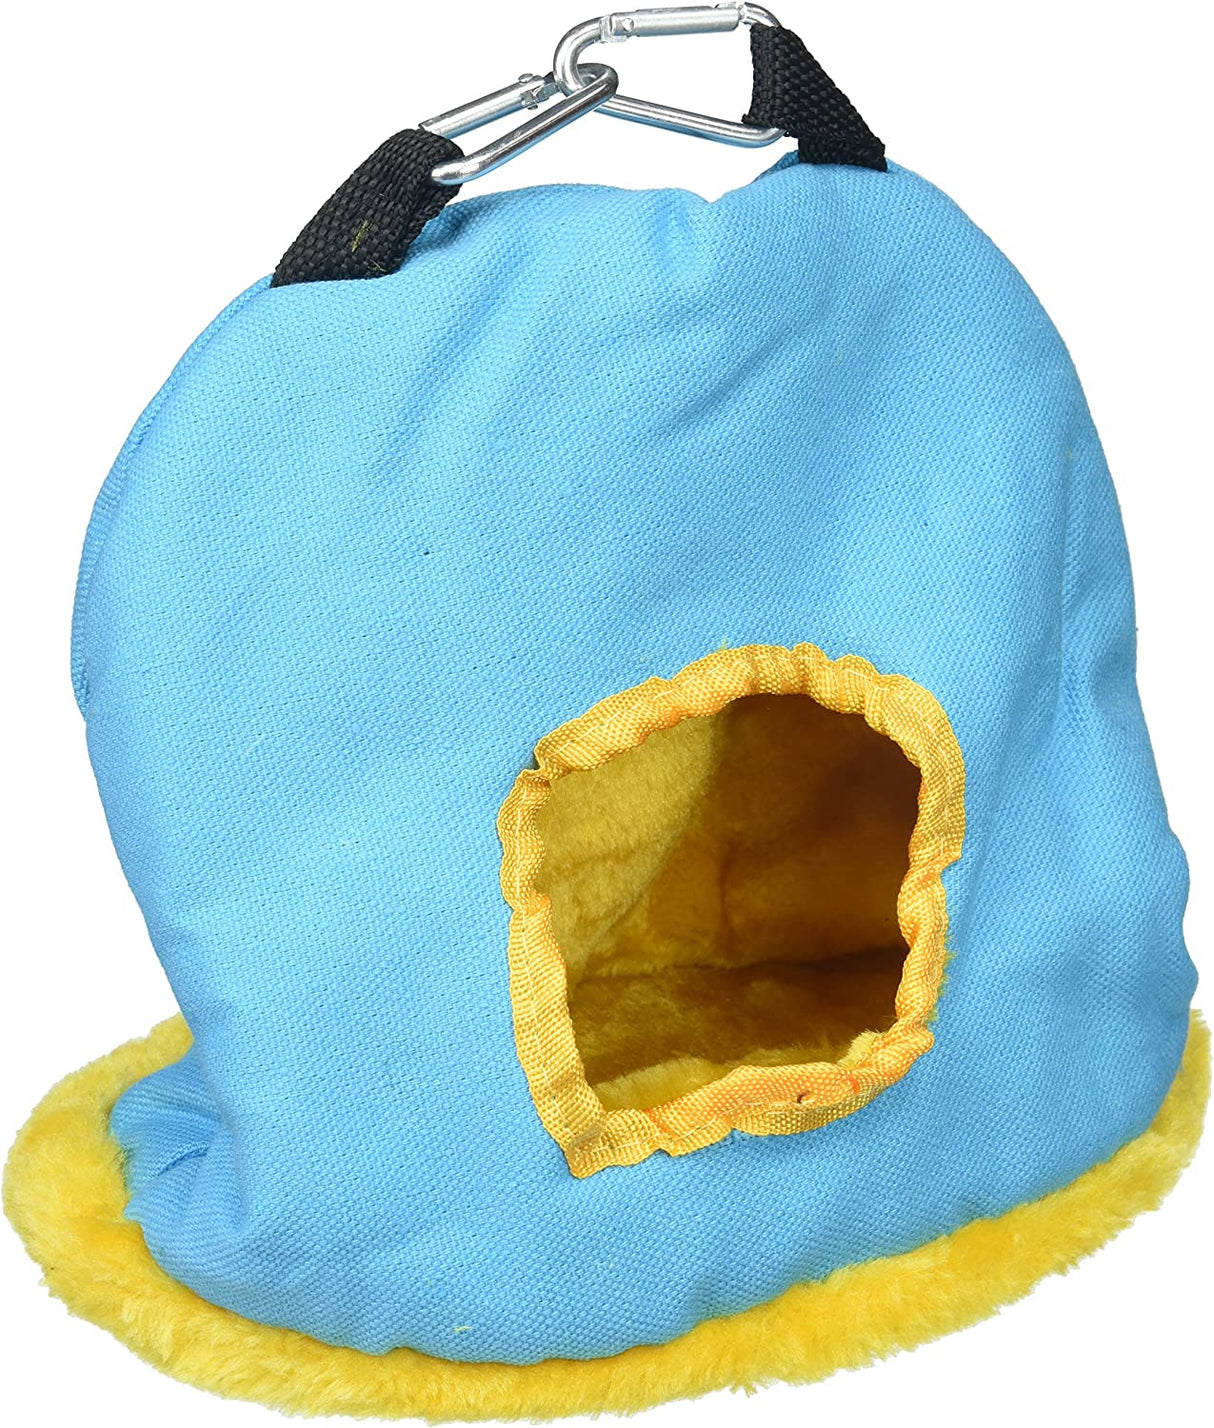 6 count Prevue Snuggle Sack Medium Bird Shelter for Sleeping, Playing and Hiding